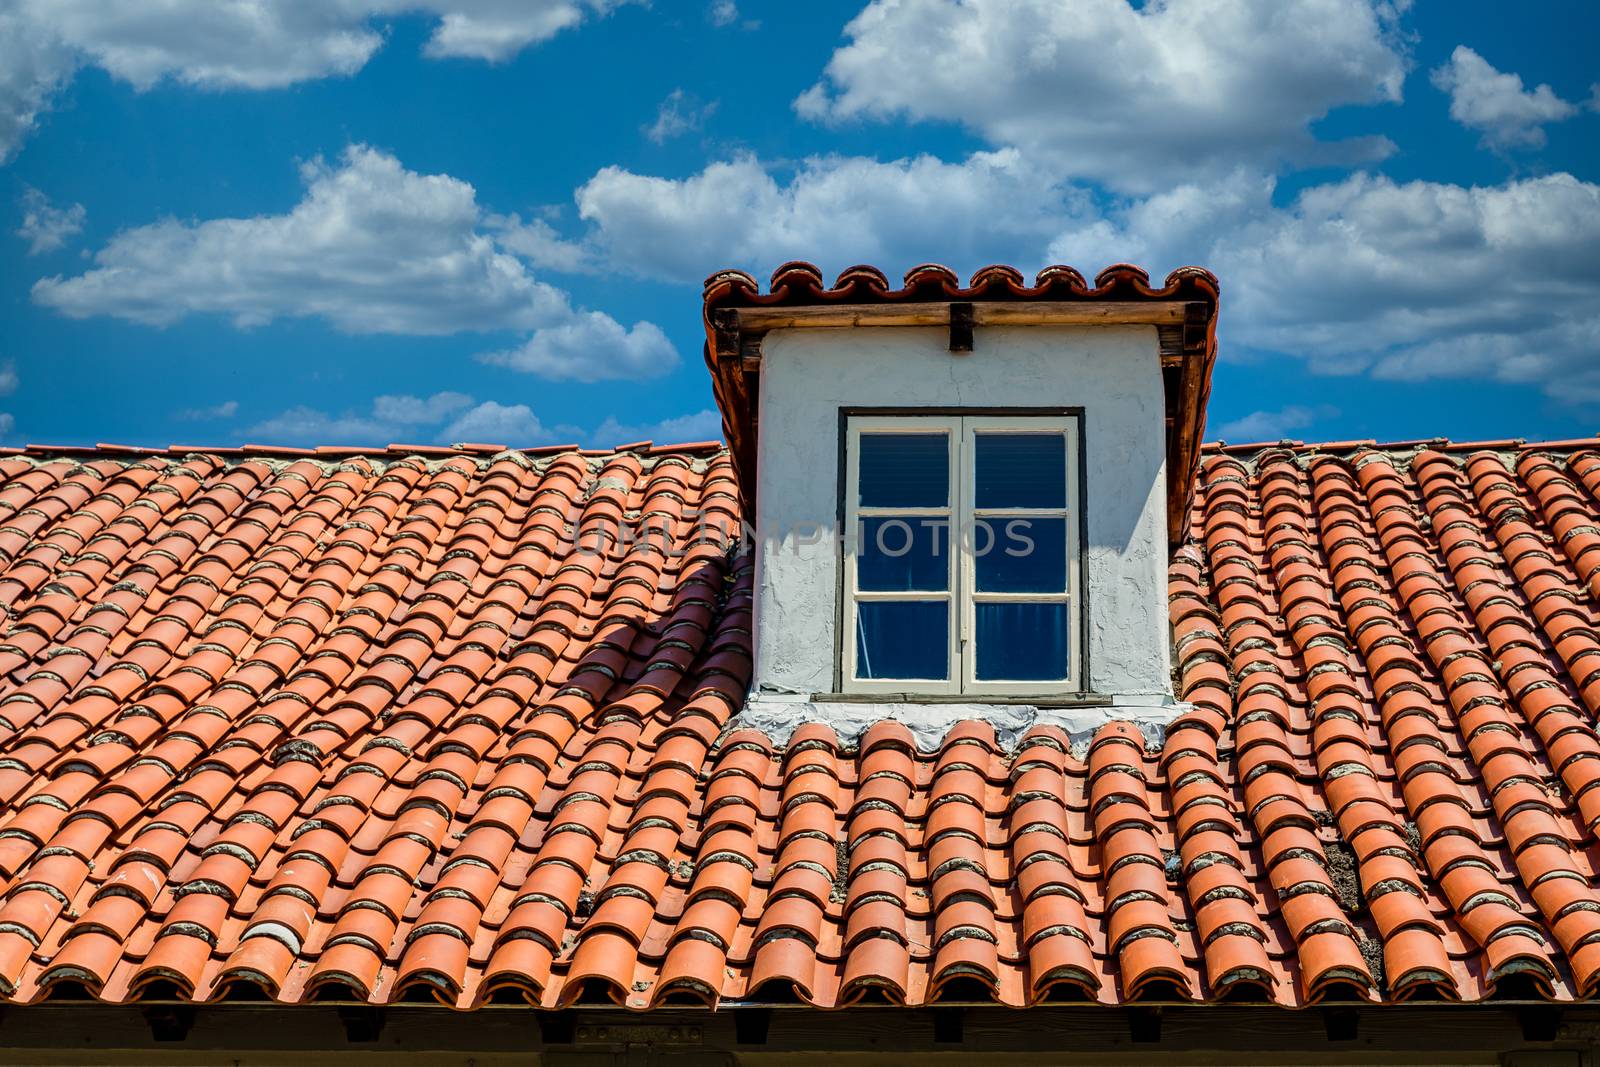 Dormer and Red Tile Roof by dbvirago